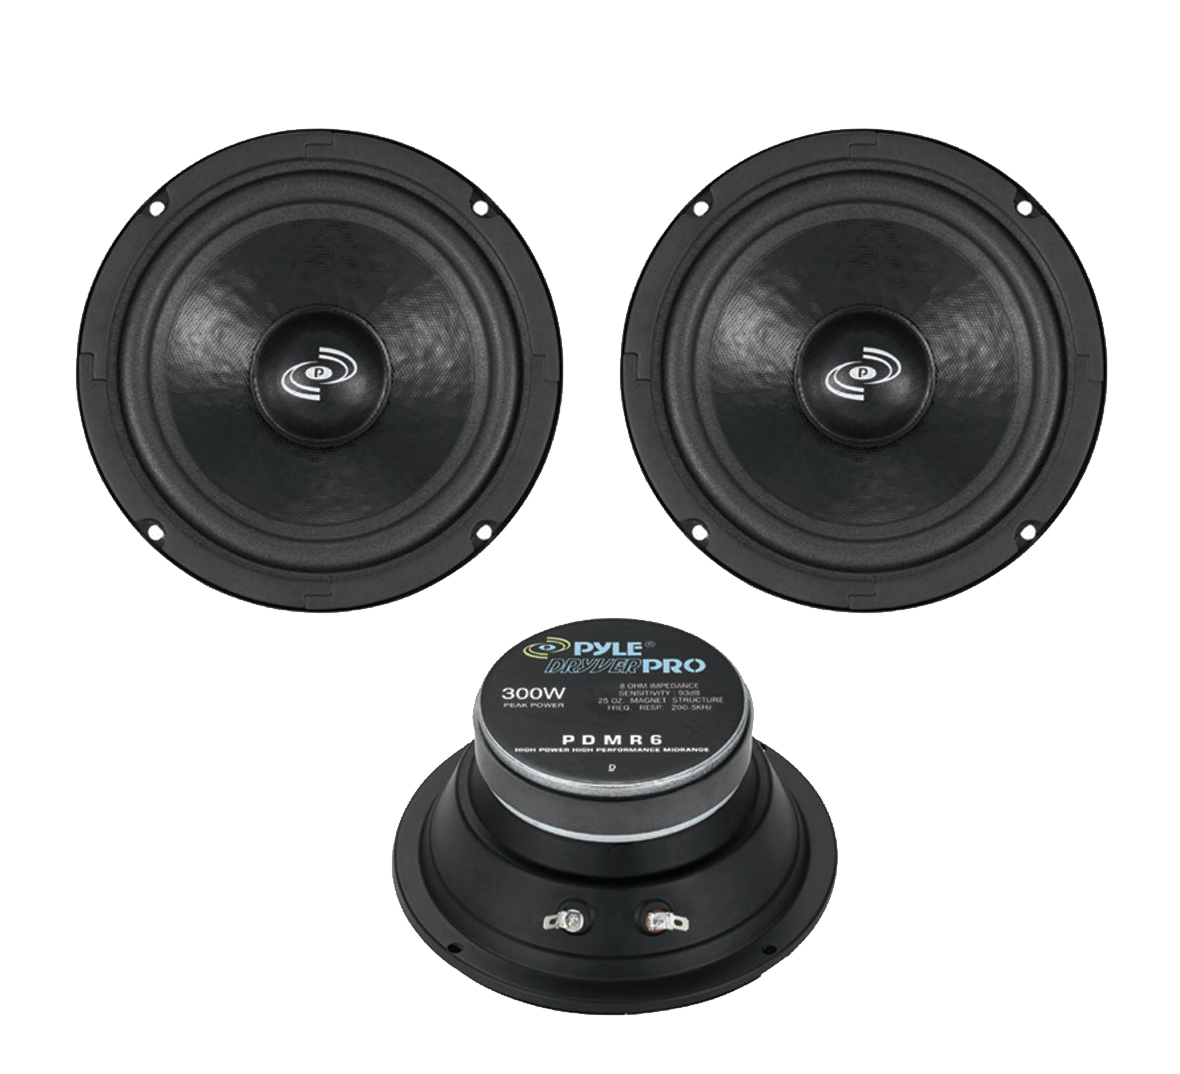 Pair of Pyle PDMR6 300W Midbass//Midrange 6.5/" Woofers Pro Sealed Back; 8 Ohm